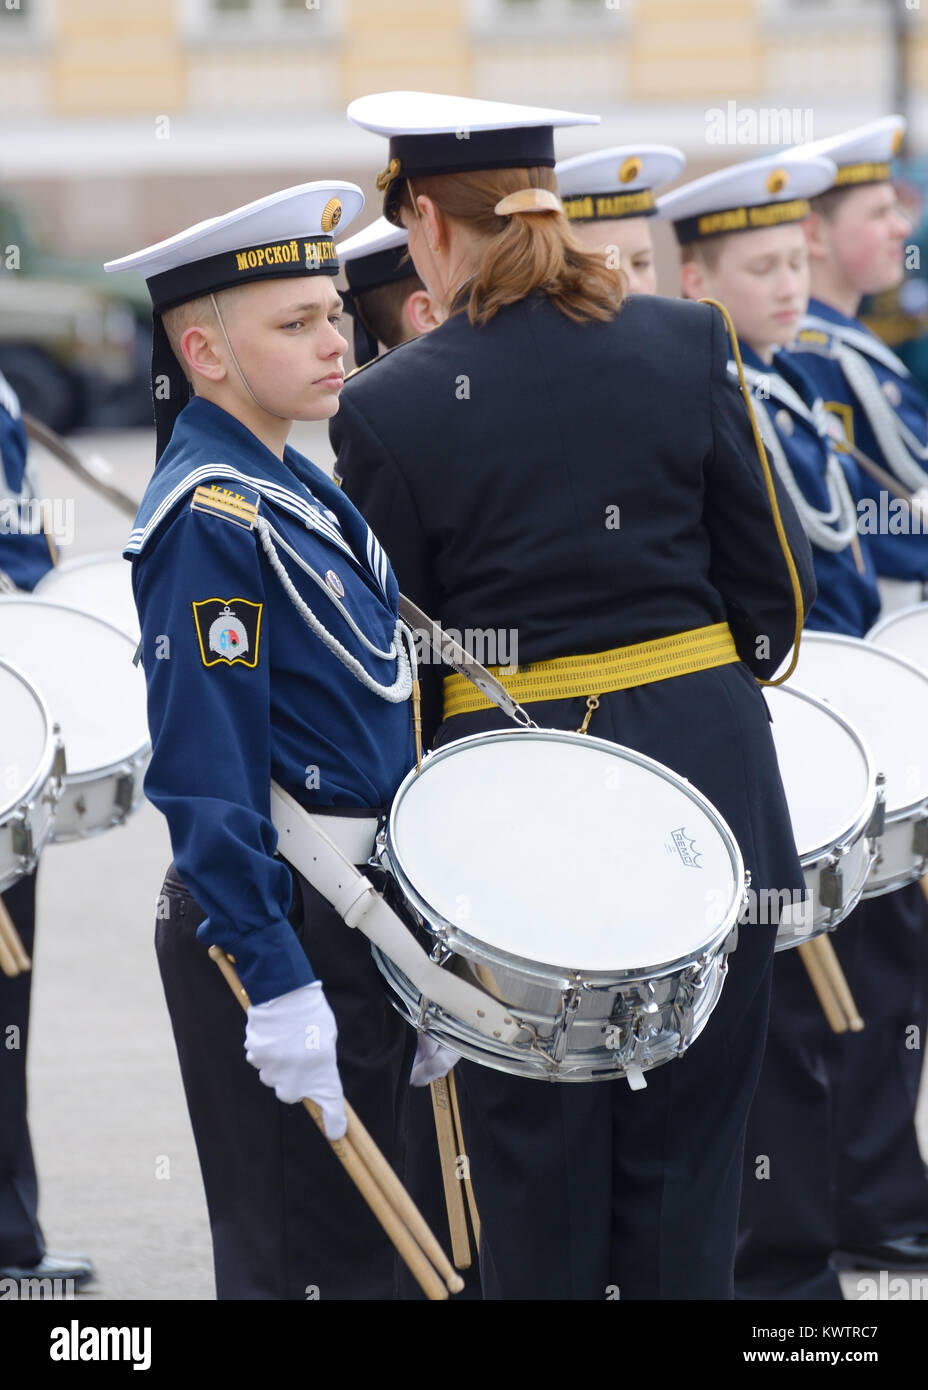 07.05.2017.Russia.Saint-Petersburg.Cadet musicians are taking part in the preparatory rehearsals for the parade on may 9,devoted to the Victory Day. Stock Photo